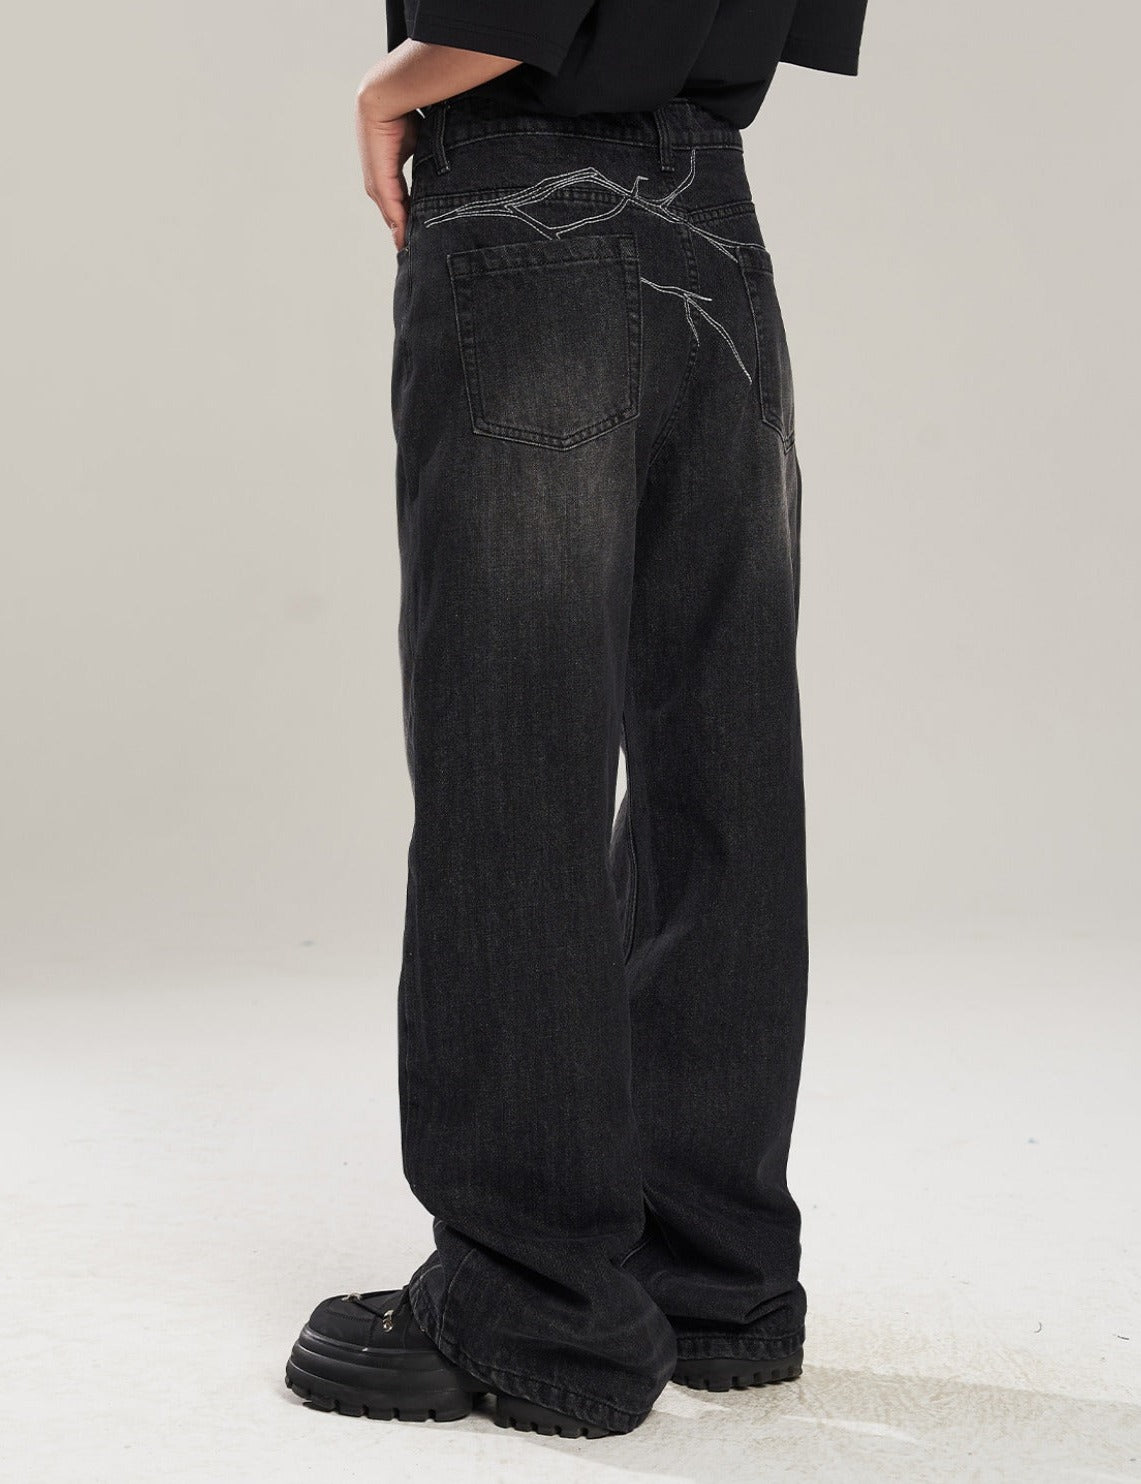 Washed Straight Leg Jeans Korean Street Fashion Jeans By New Start Shop Online at OH Vault